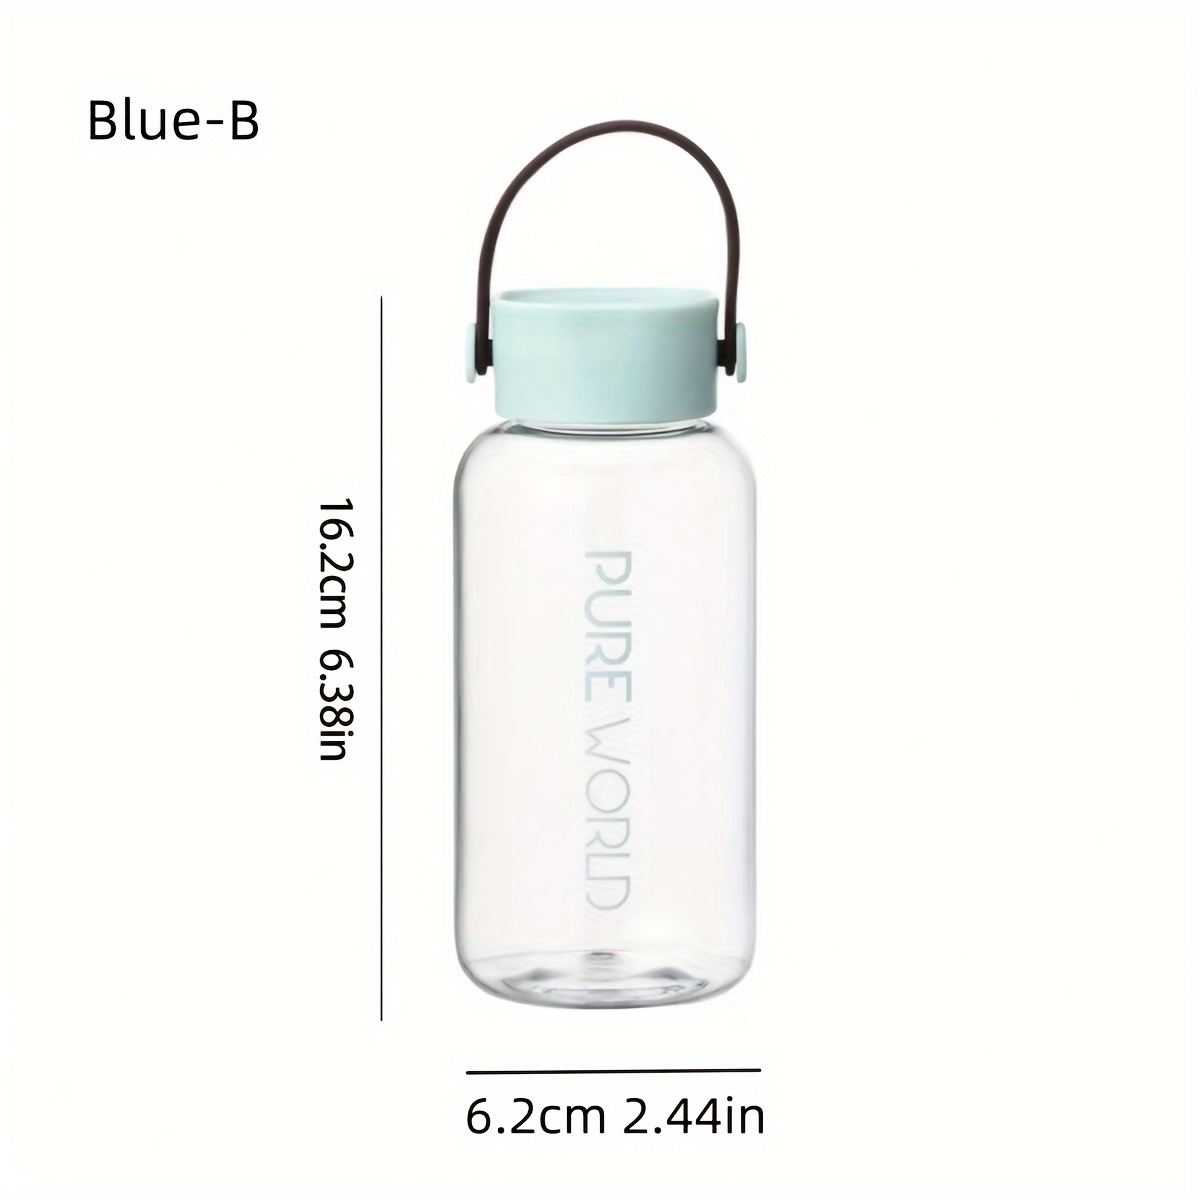 Cup Dimensions for Bottle Packaging